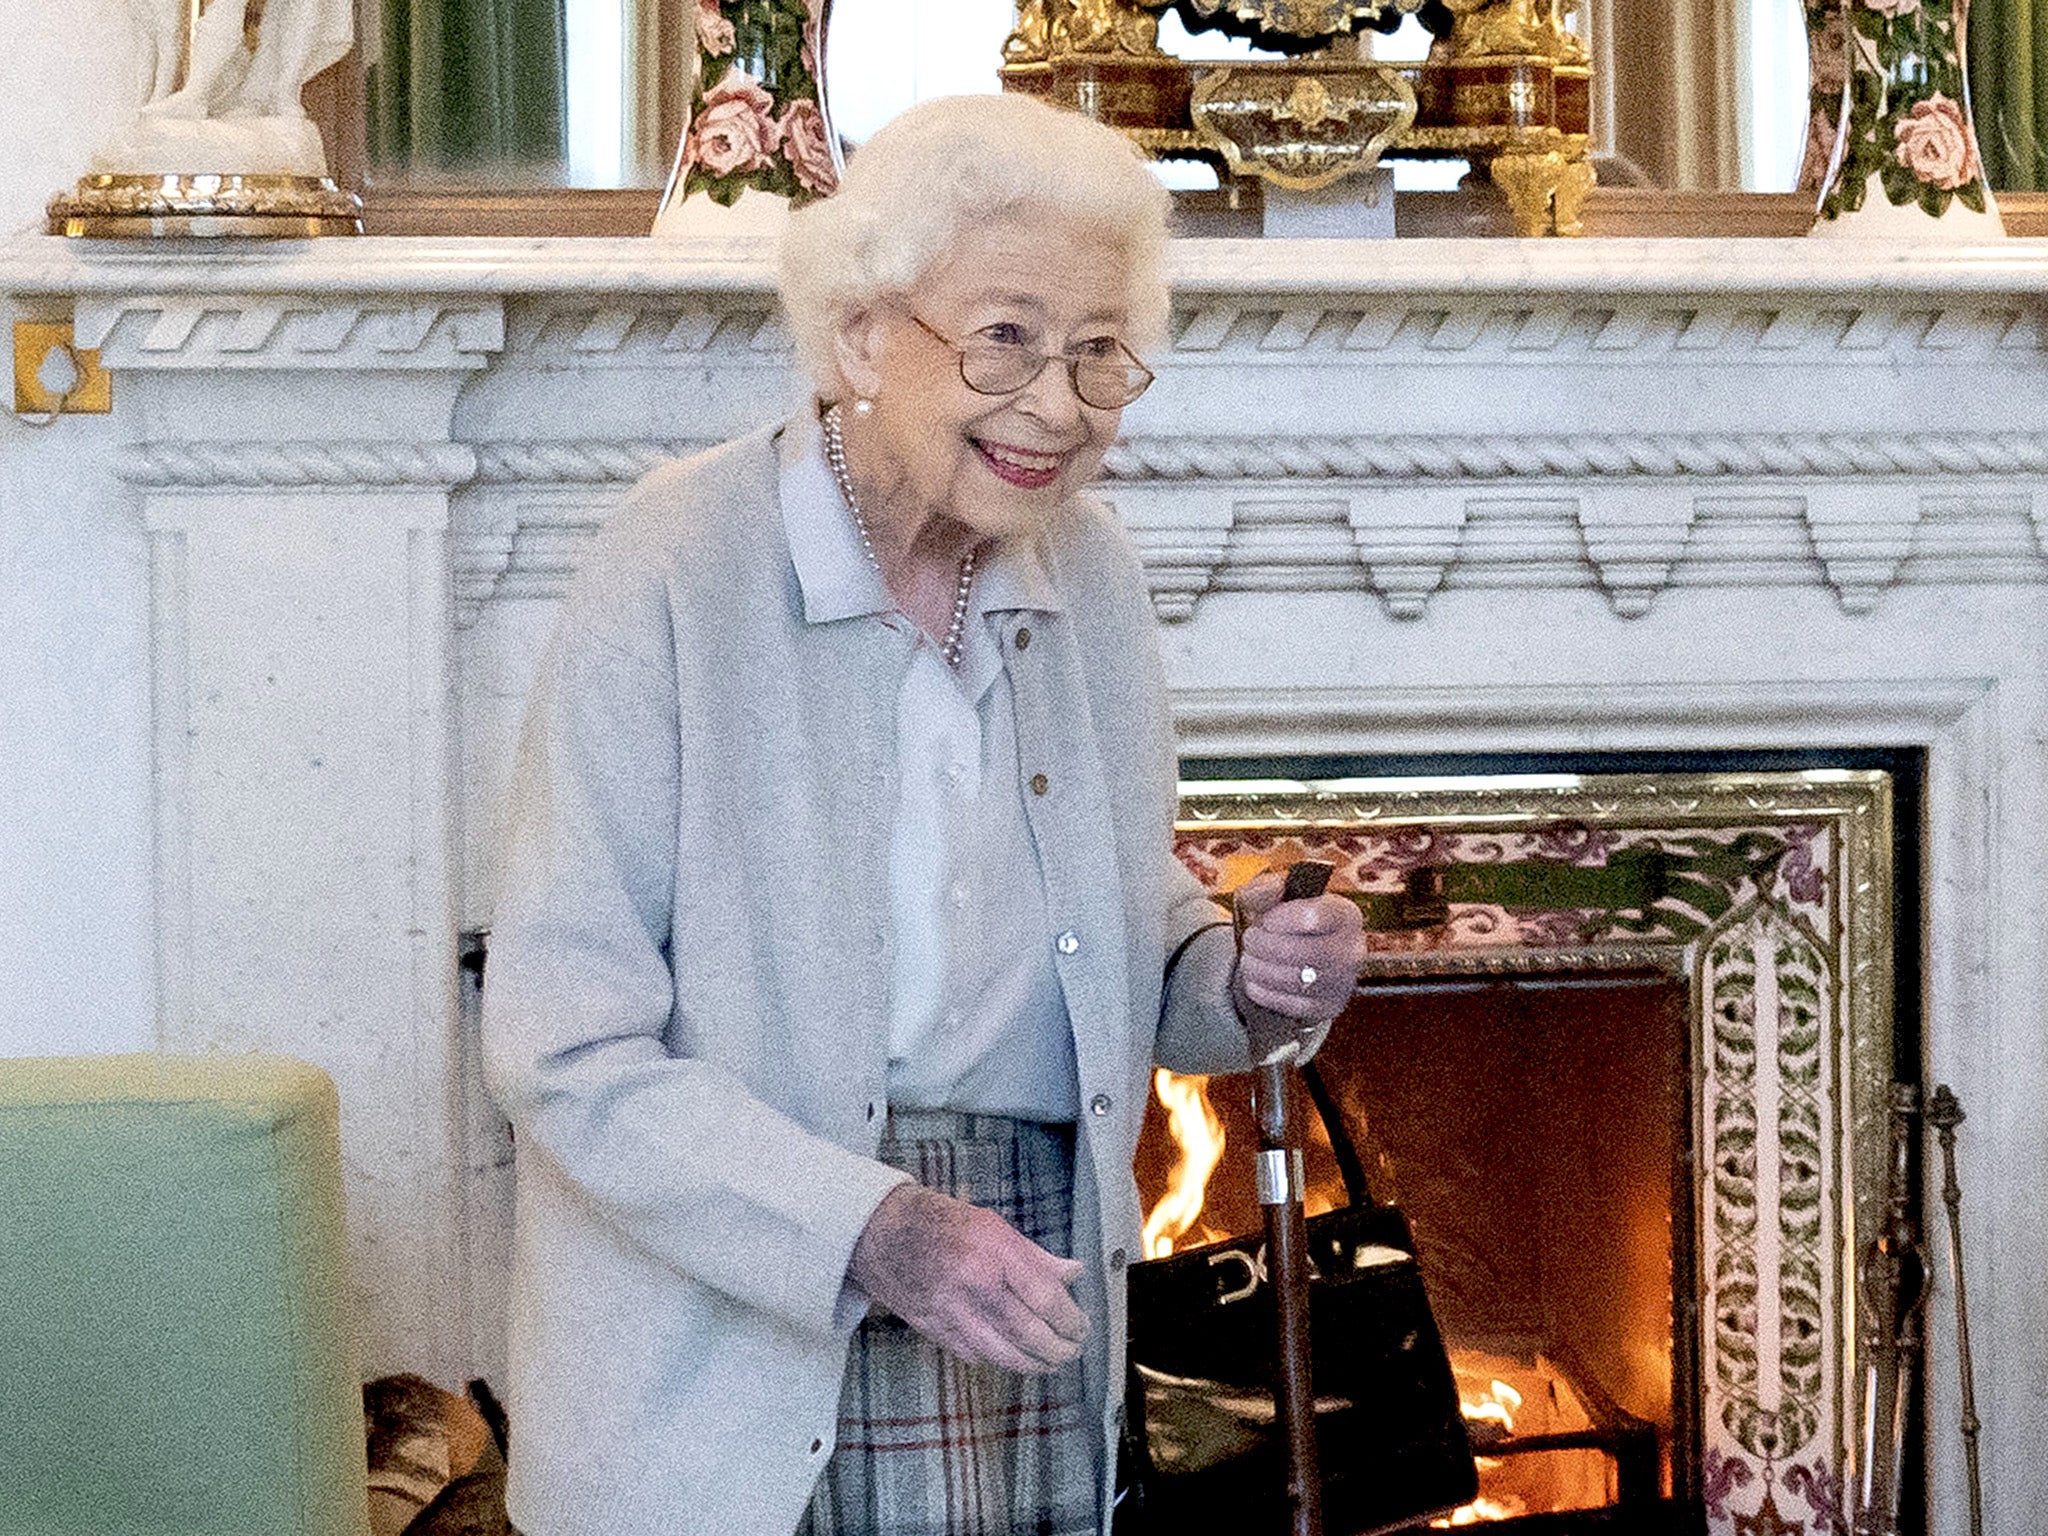 The Queen faced mobility issues in recent months and used a stick at Balmoral this week